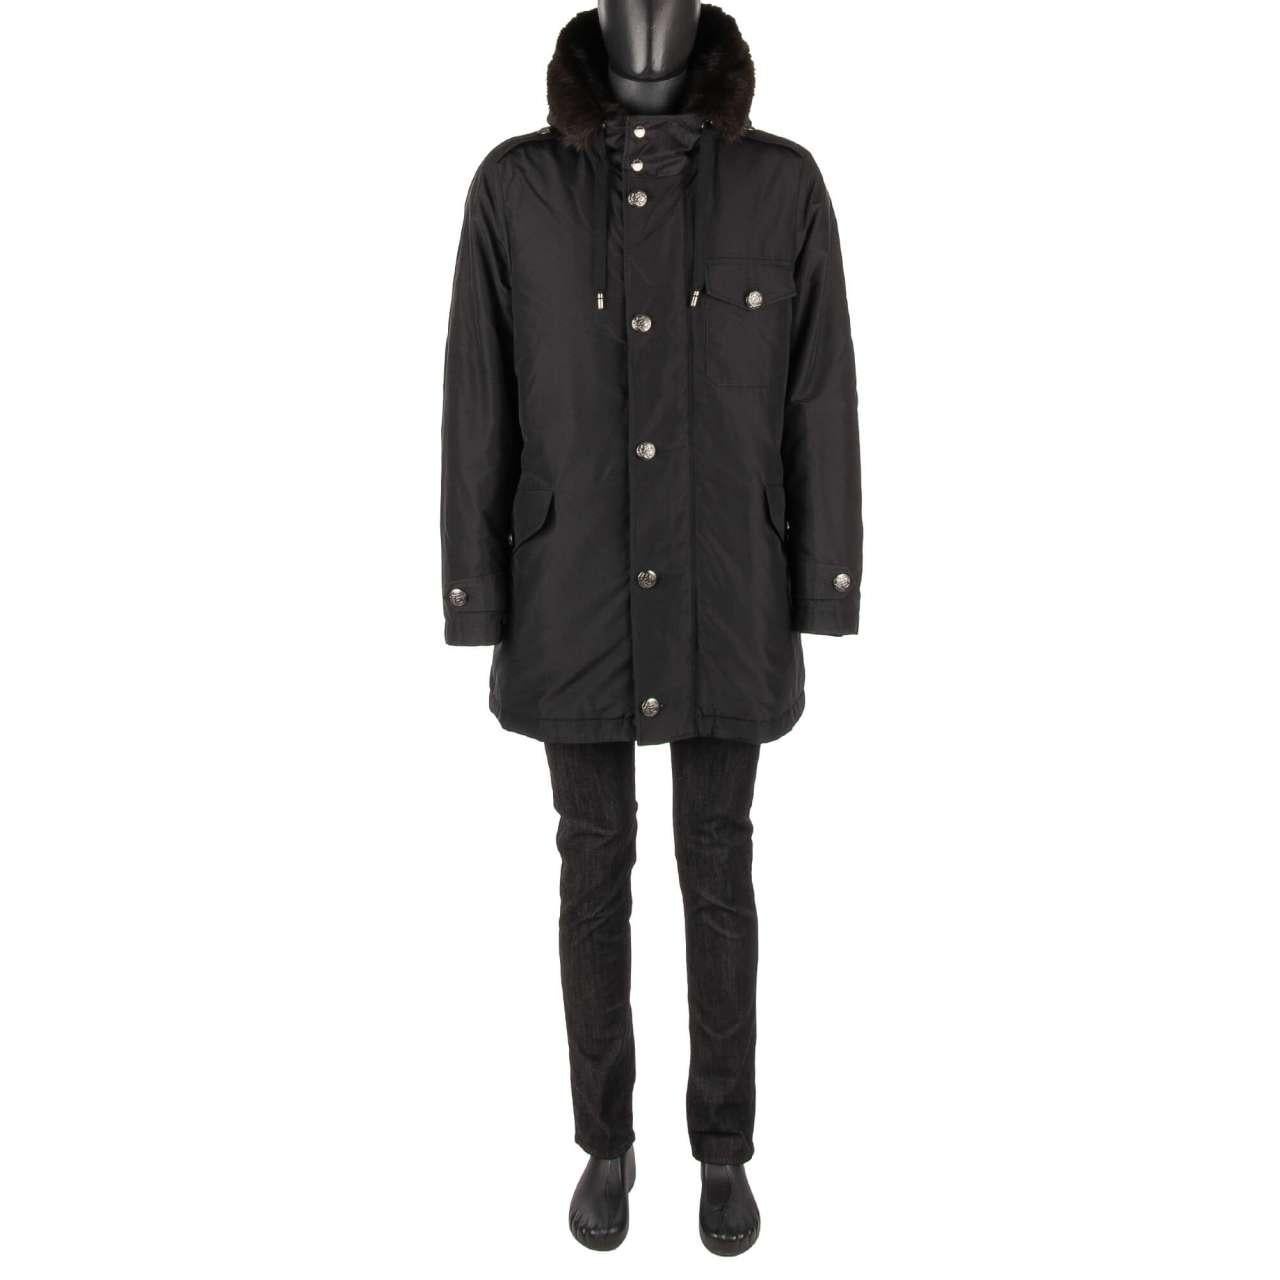 Dolce & Gabbana Silk Parka Jacket with Detachable Fur Lining and Hoody Black 54 For Sale 2